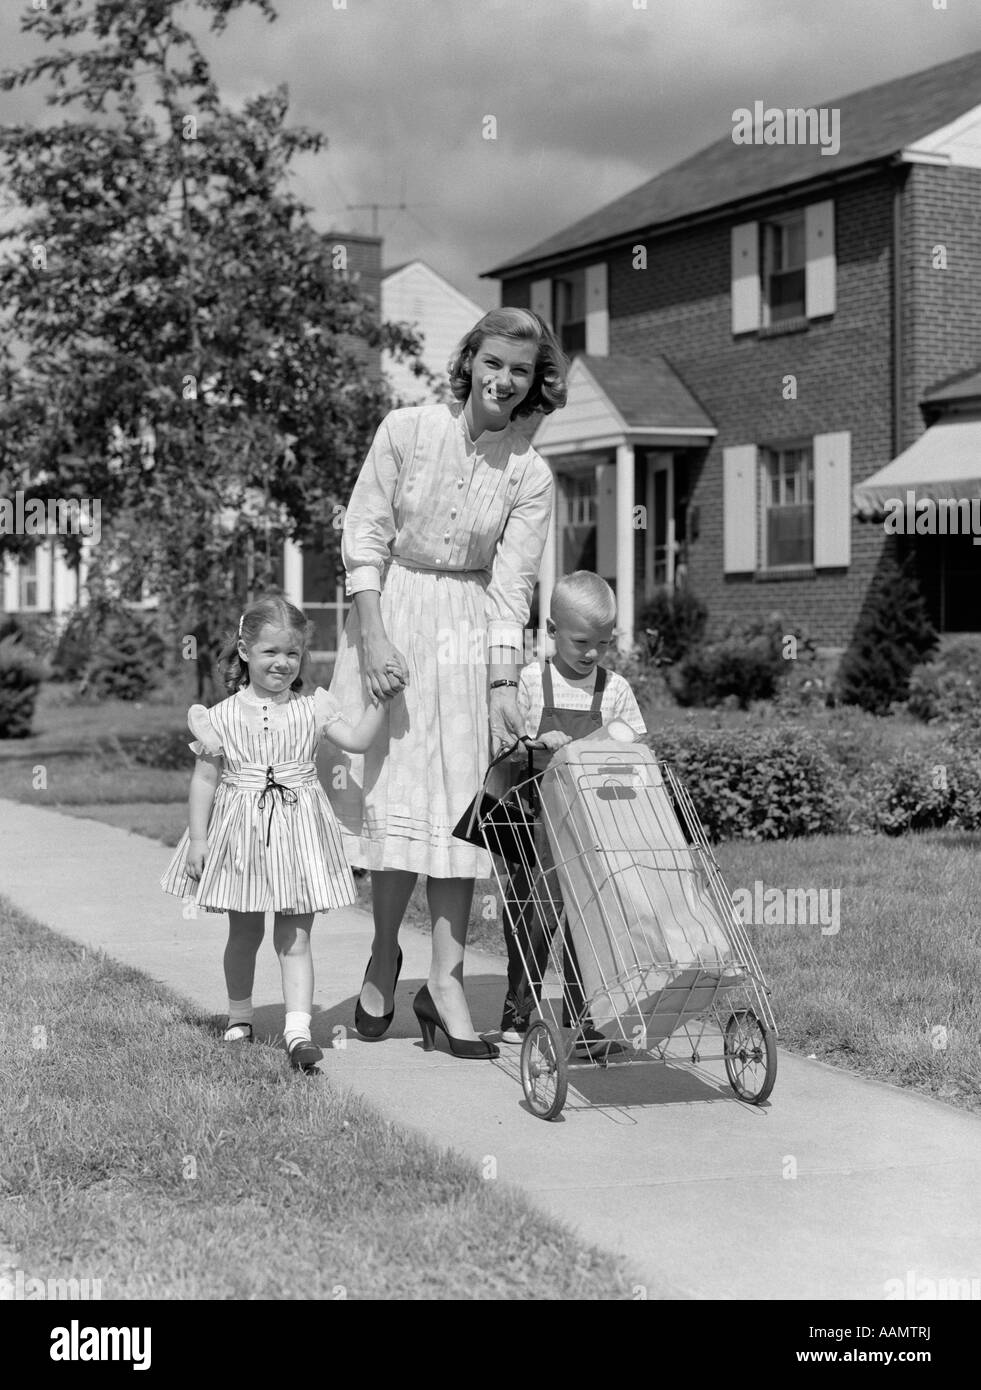 1950s MOTHER LOOKING AT CAMERA SMILING WALKING DOWN SUBURBAN SIDEWALK HOLDING DAUGHTER'S HAND HELPING SON PUSHING GROCERY CART Stock Photo